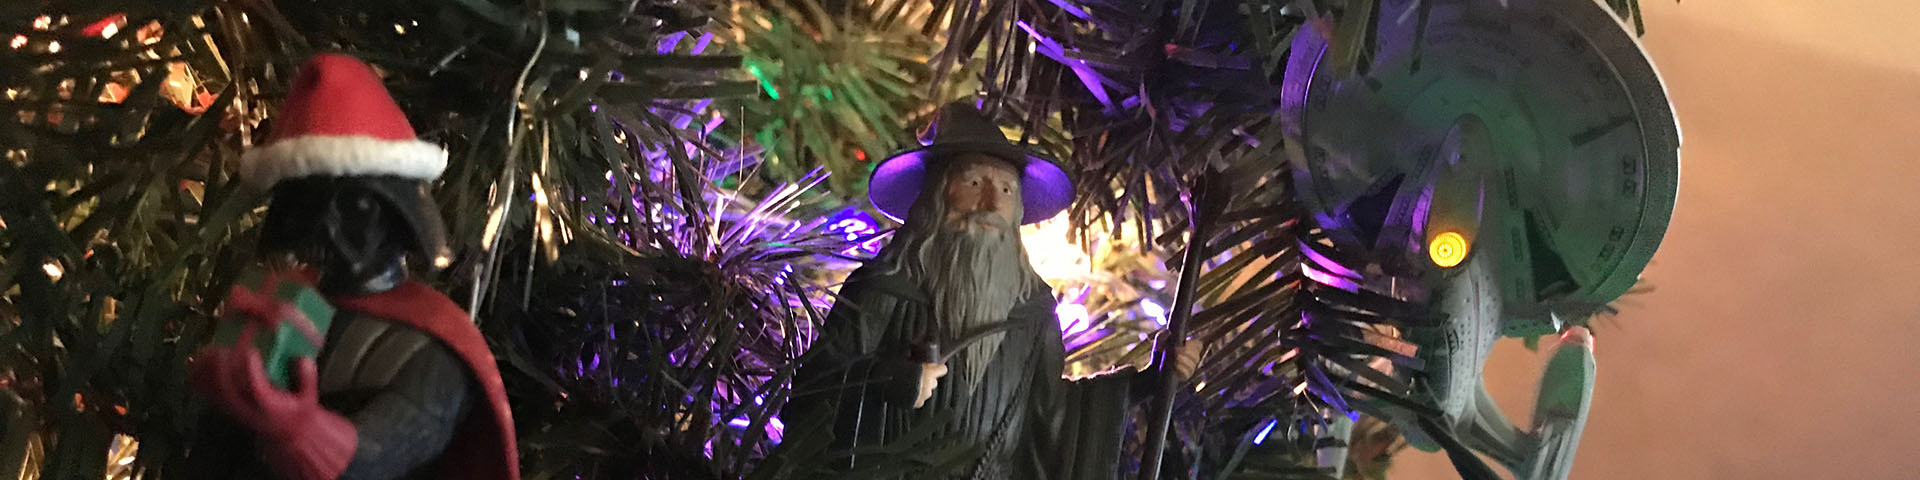 Three ornaments - Darth Vadar, the wizard Gandalf, and the starship Enterprise - appear on a Christmas tree.